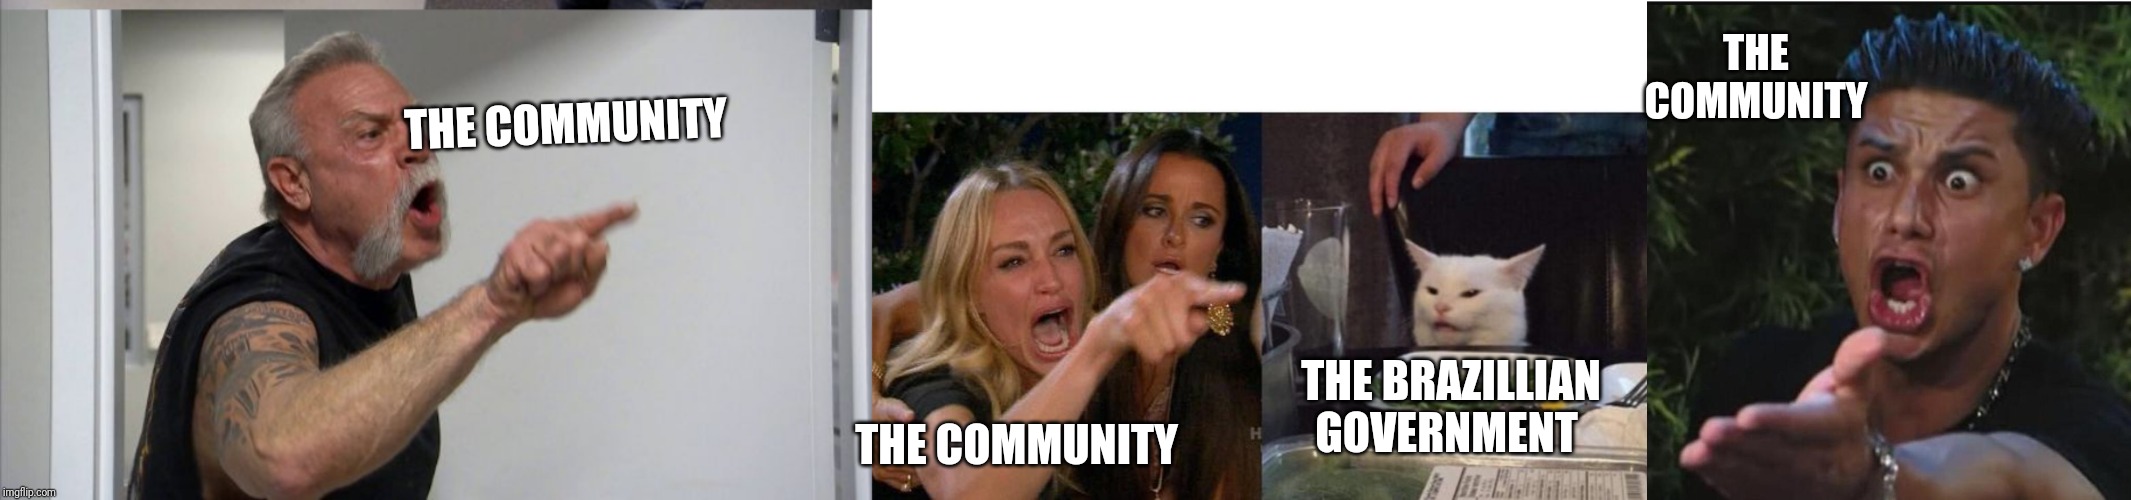 THE COMMUNITY THE BRAZILLIAN GOVERNMENT THE COMMUNITY THE COMMUNITY | image tagged in memes,american chopper argument,woman yelling at a cat,four panel taylor armstrong pauly d callmecarson cat | made w/ Imgflip meme maker